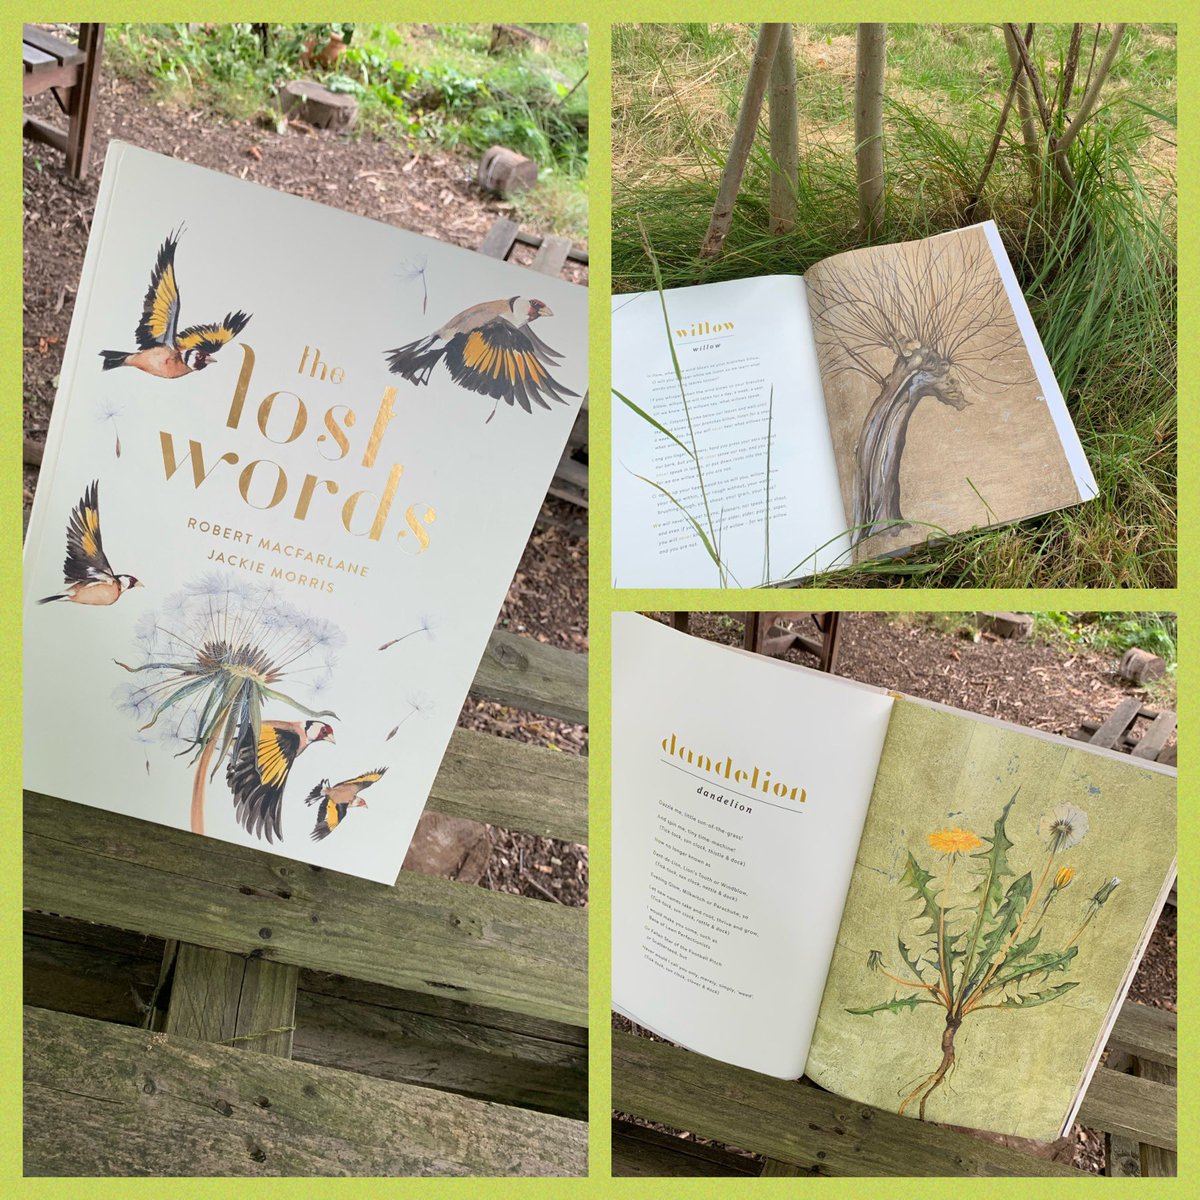 🌿 THE LOST WORDS 💫

Today is transition day and, this year, our focus text is ‘The Lost Words’ by @RobGMacfarlane & @JackieMorrisArt 🌺

Inspired by our Forest School and work for @TMAT_Earthshot, we’re casting spells and conjuring back words from the natural world around us 🌍